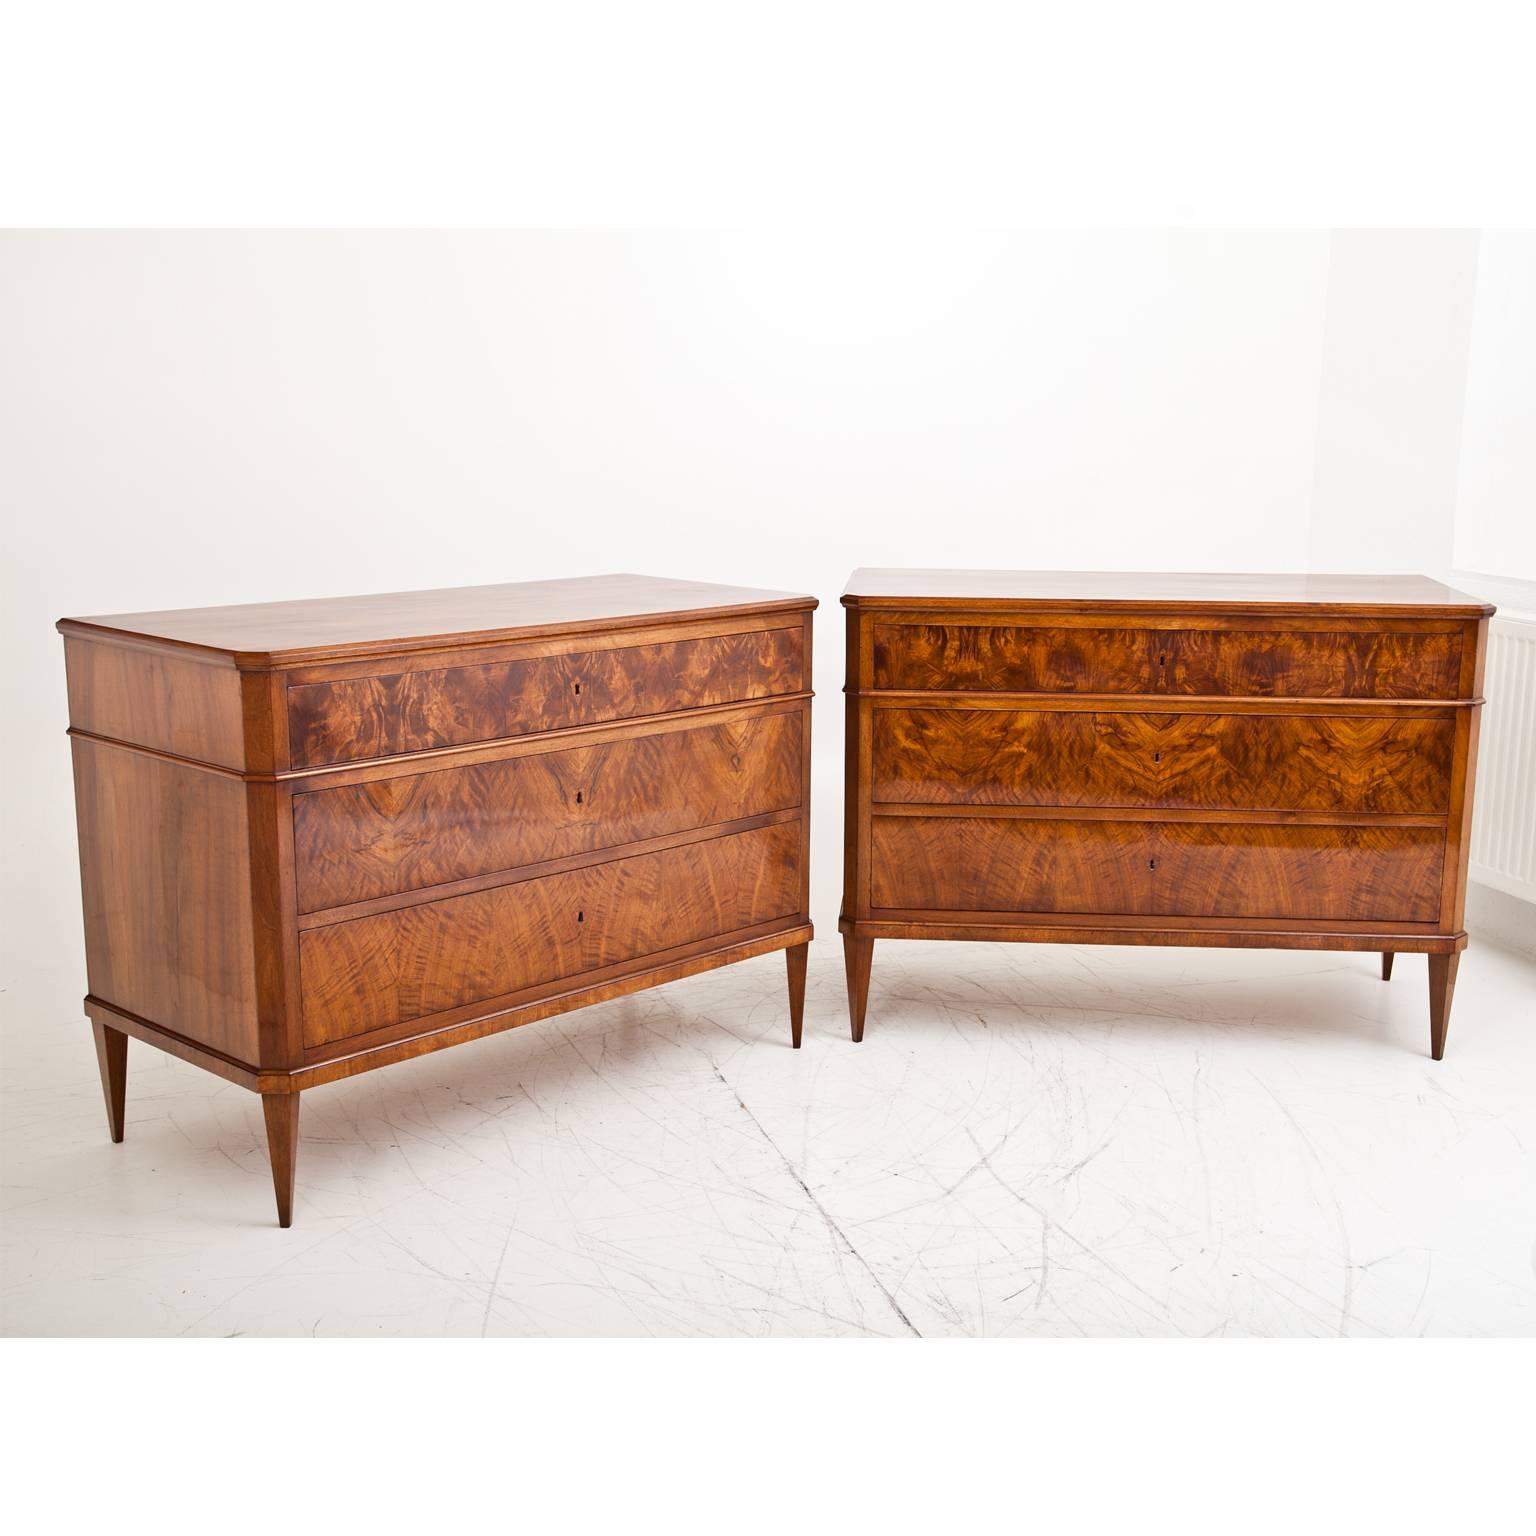 Pair of three-drawer chests of drawers on tapered feet, the body with slanted edges. The top drawer is accentuated with a moulding strip. The chests show a very beautiful walnut veneer pattern. They are restored and French polished.